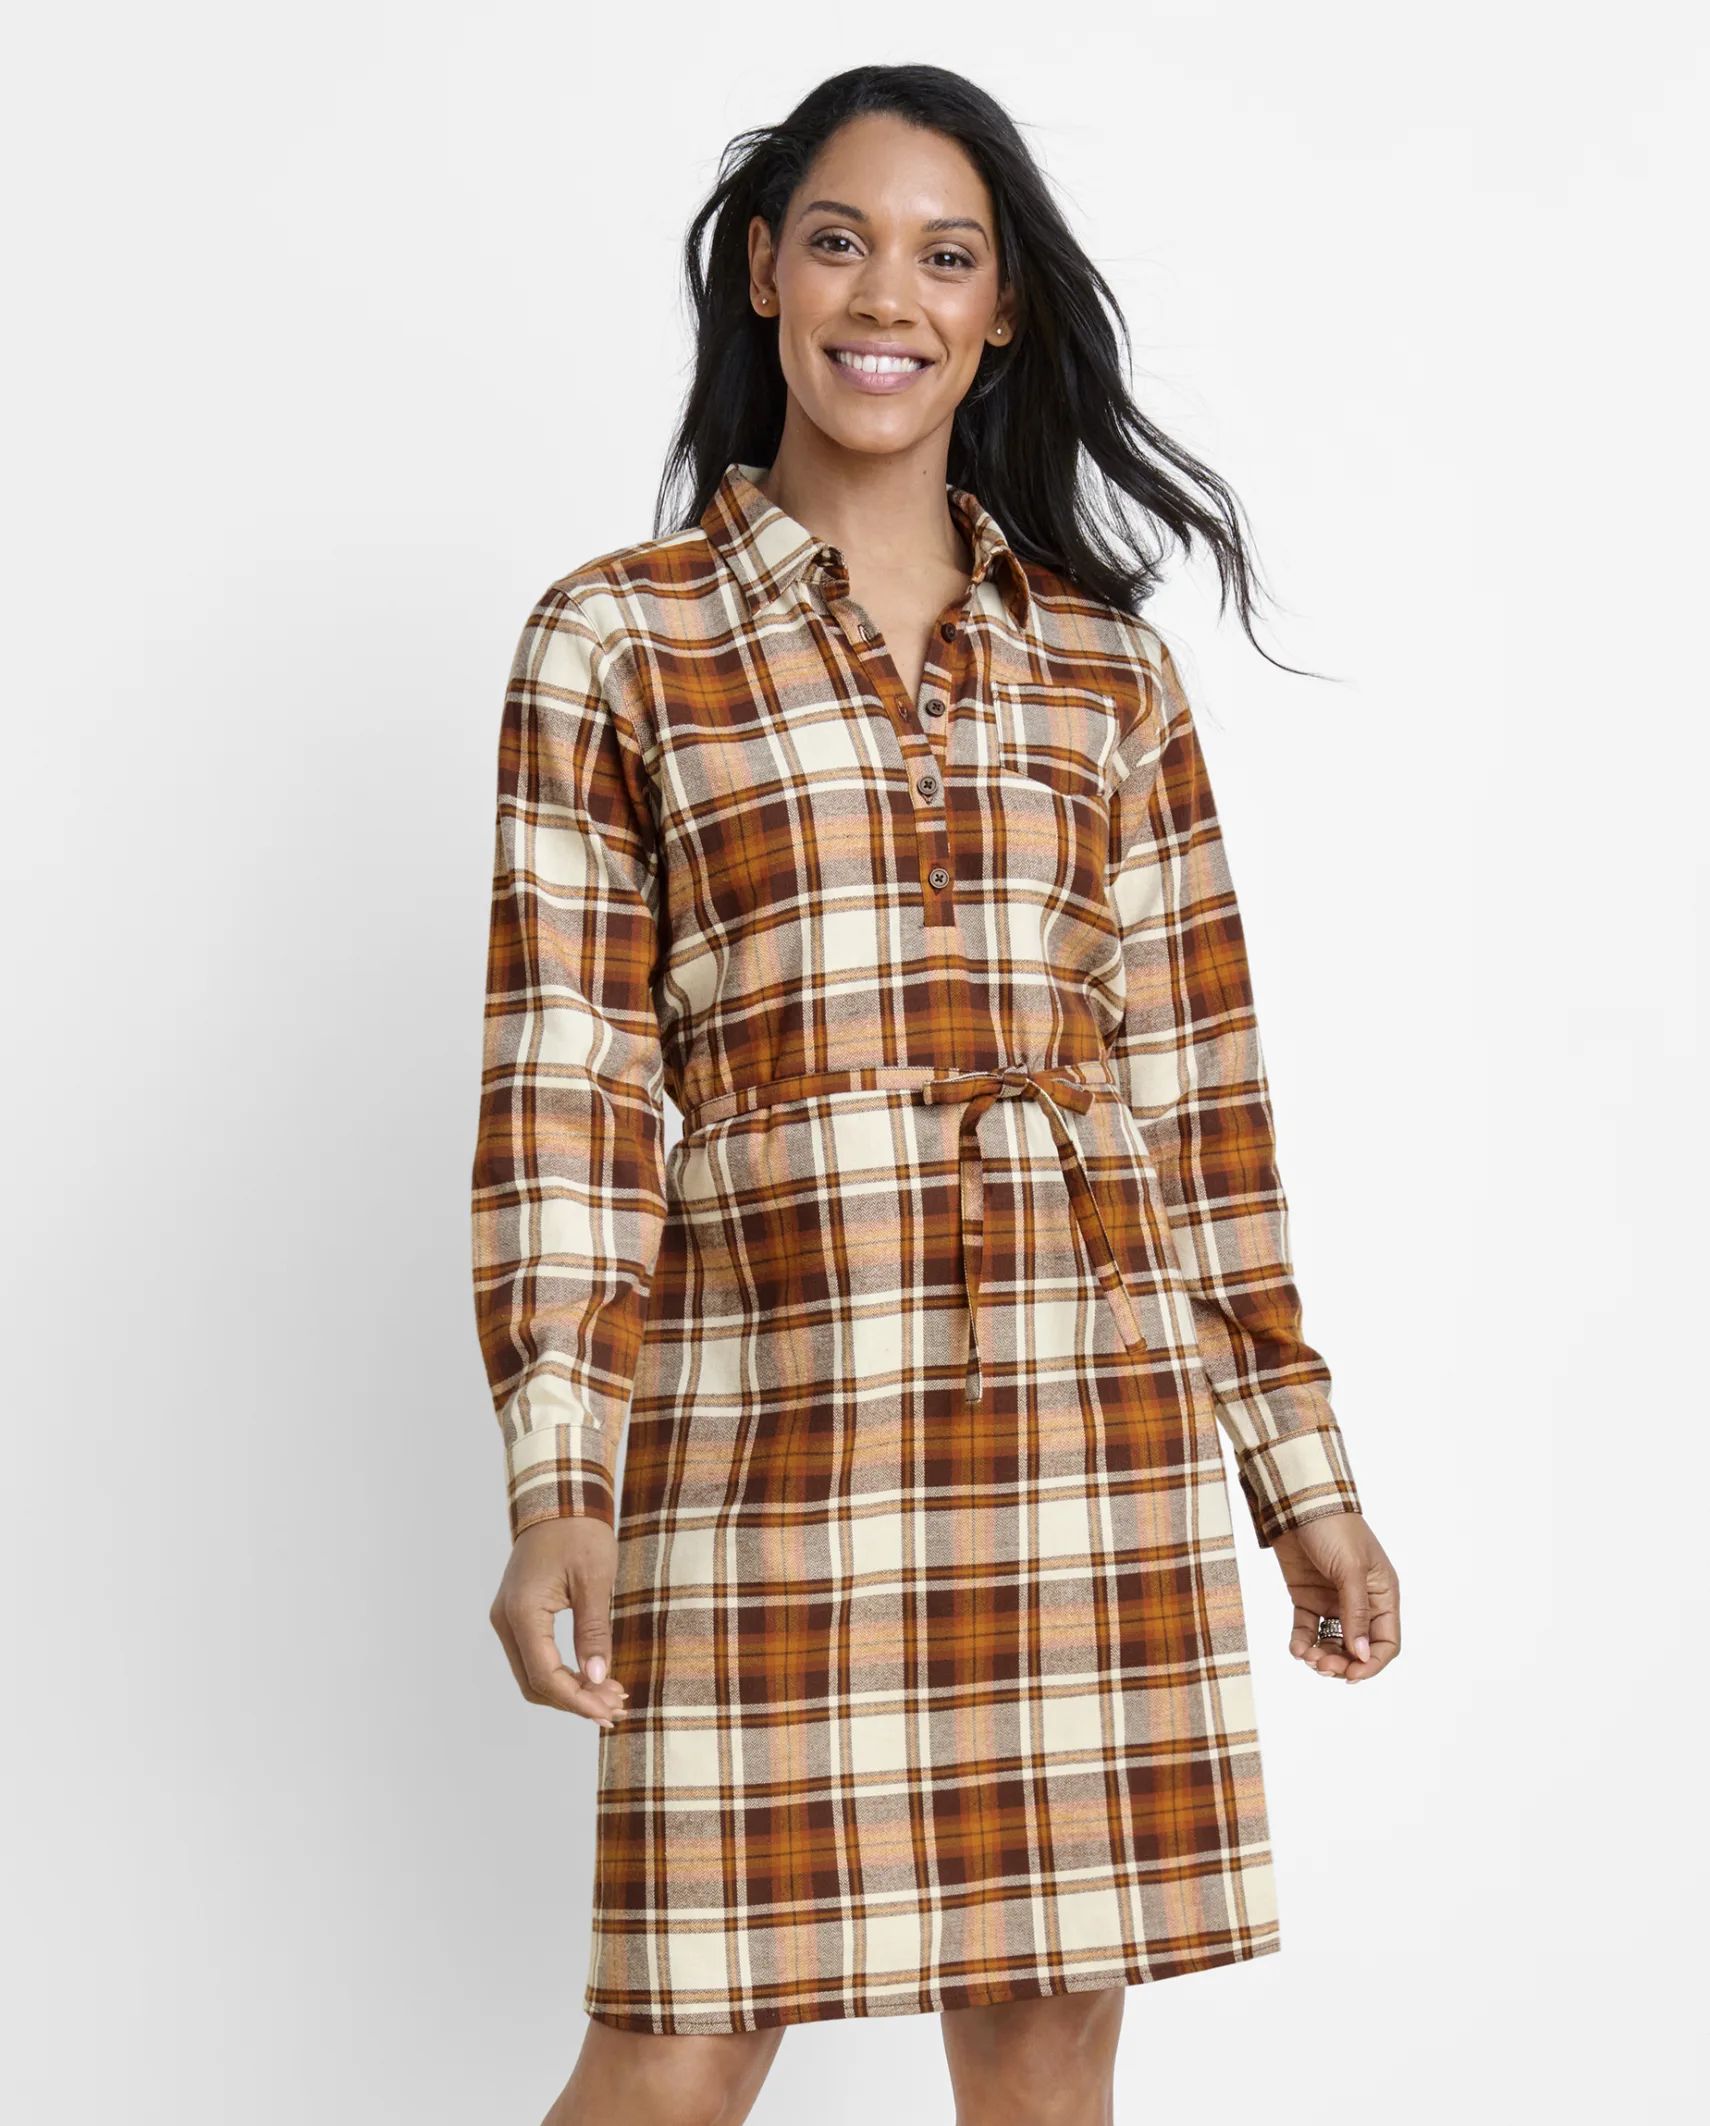 Womens Matching Family Plaid Flannel Shirt Dress - hay stack | The Children's Place